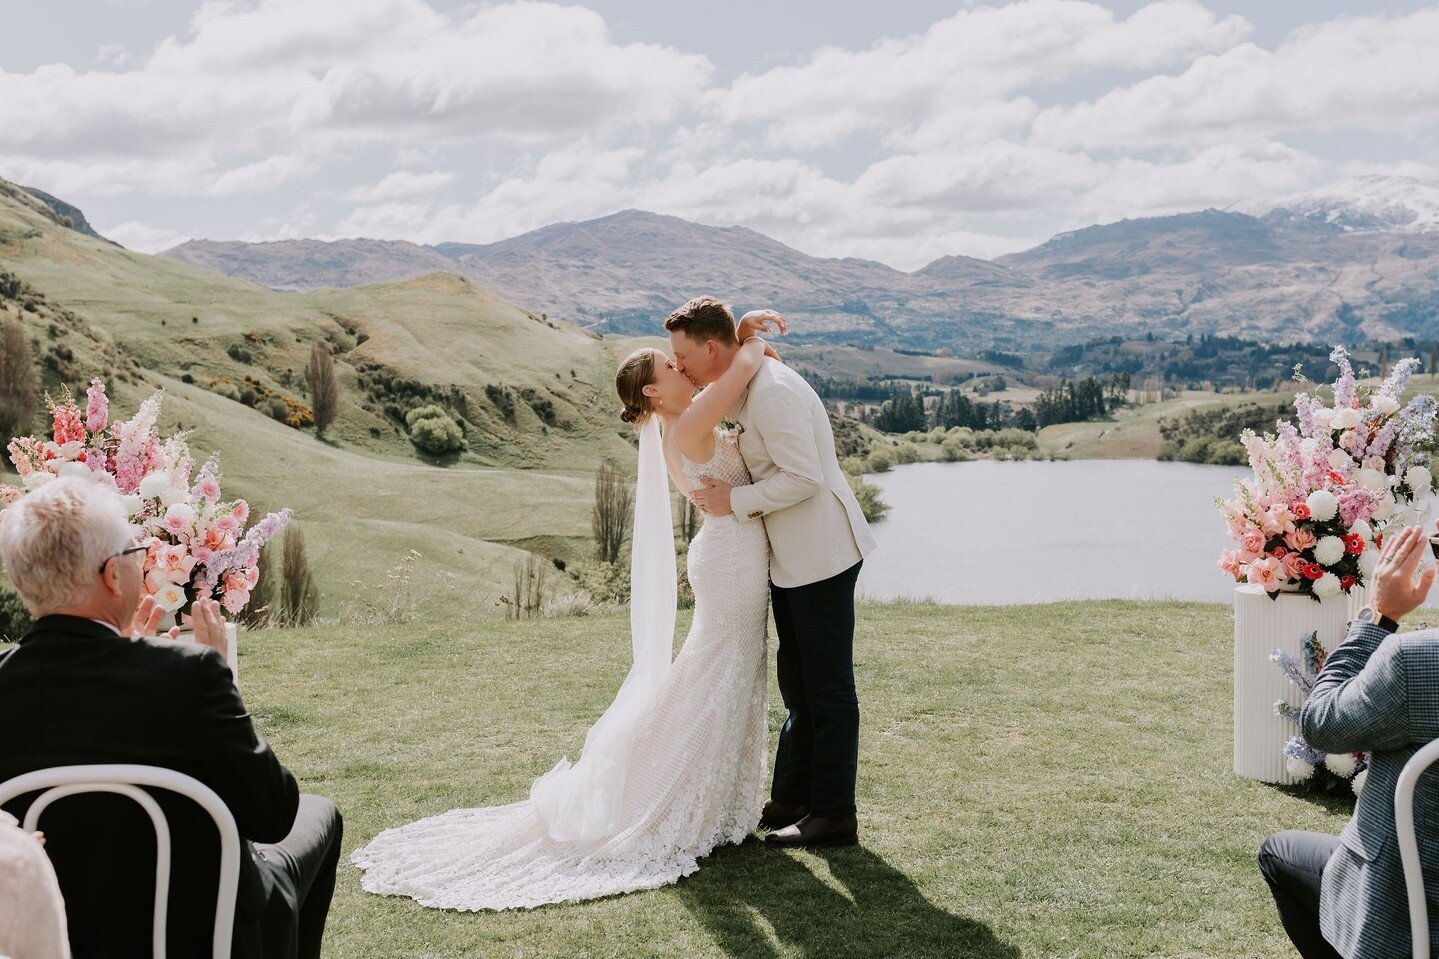 Welcome to Queenstown's most scenic venue 💚 If you're planning your dream destination wedding, then look no further than NZ High Country.⁠
⁠
With 4x different stunning locations on the NZ High Country property, and views spanning across nearly every